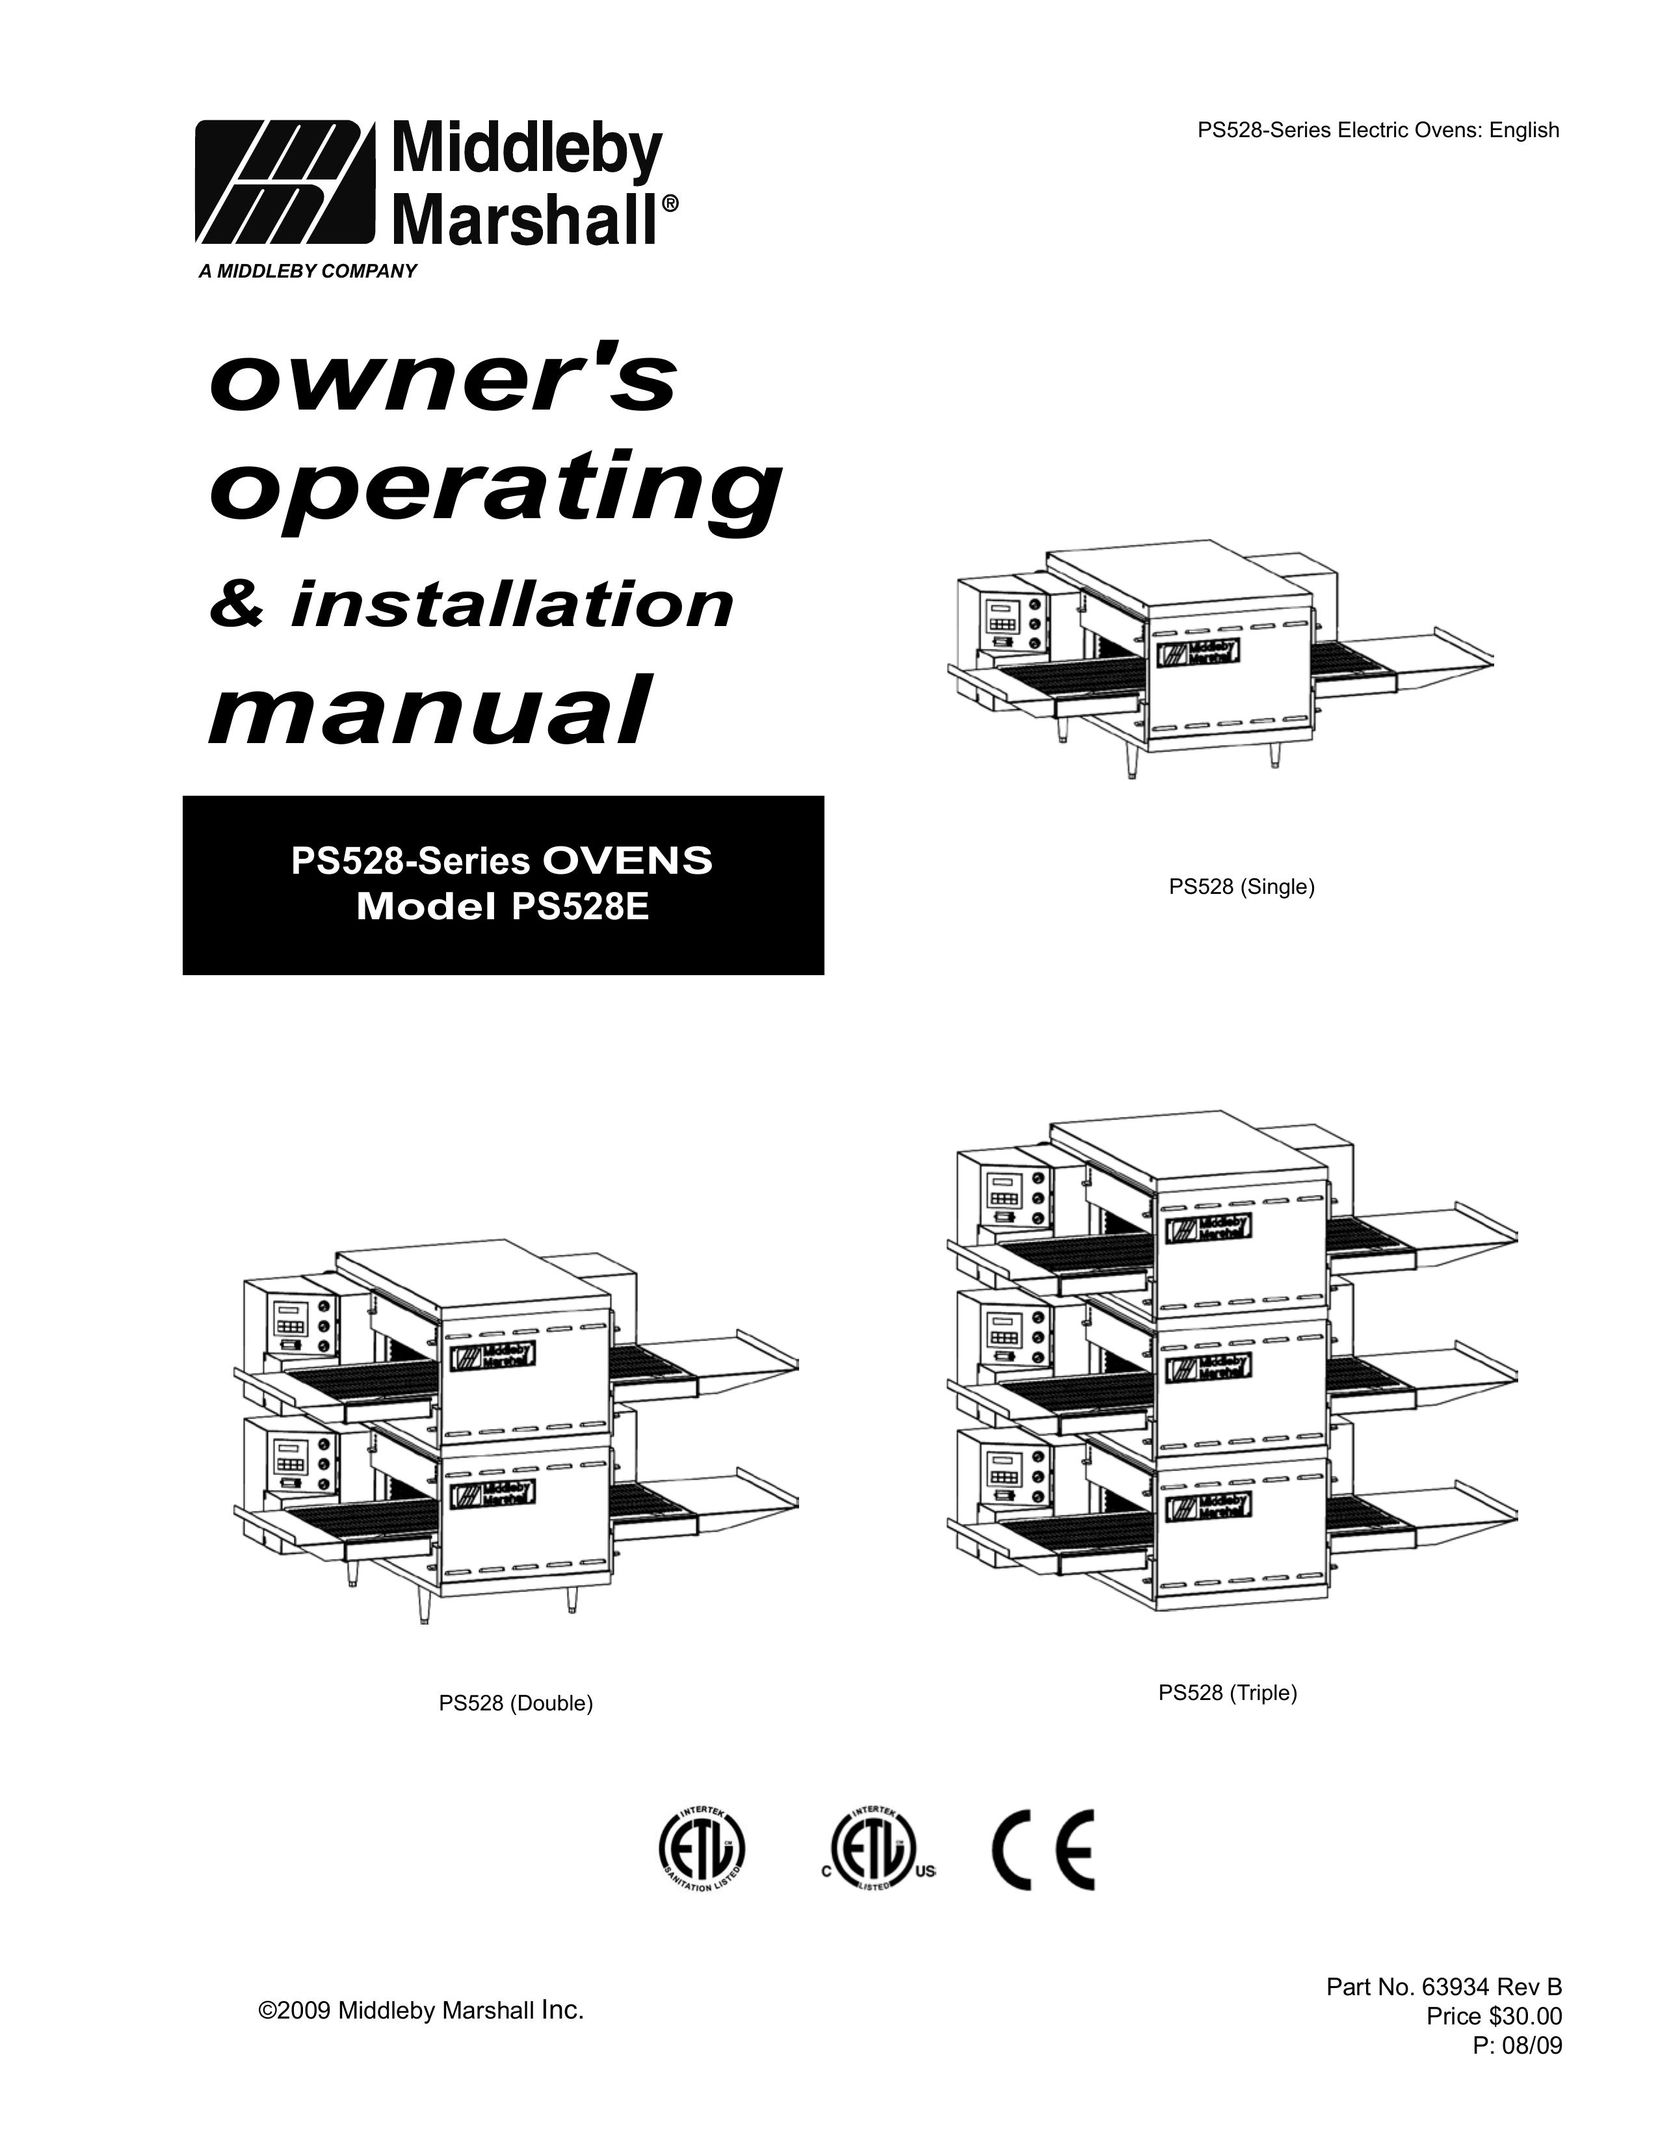 Middleby Marshall PS528 (Triple) Oven User Manual